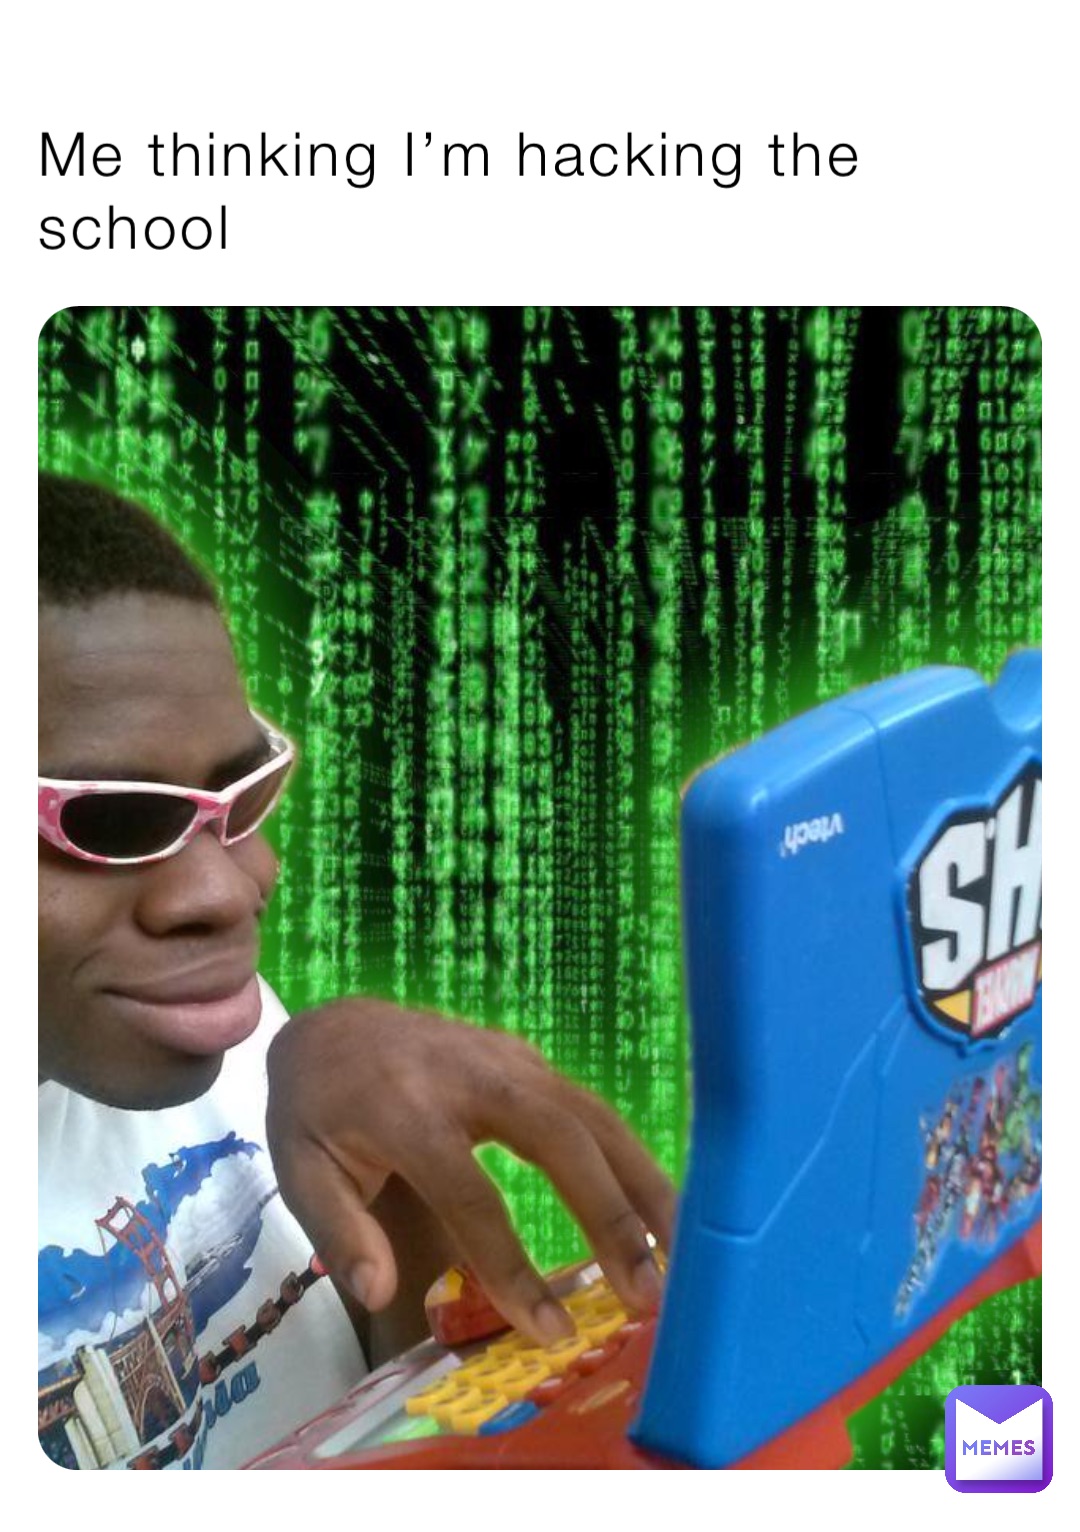 Me thinking I’m hacking the school